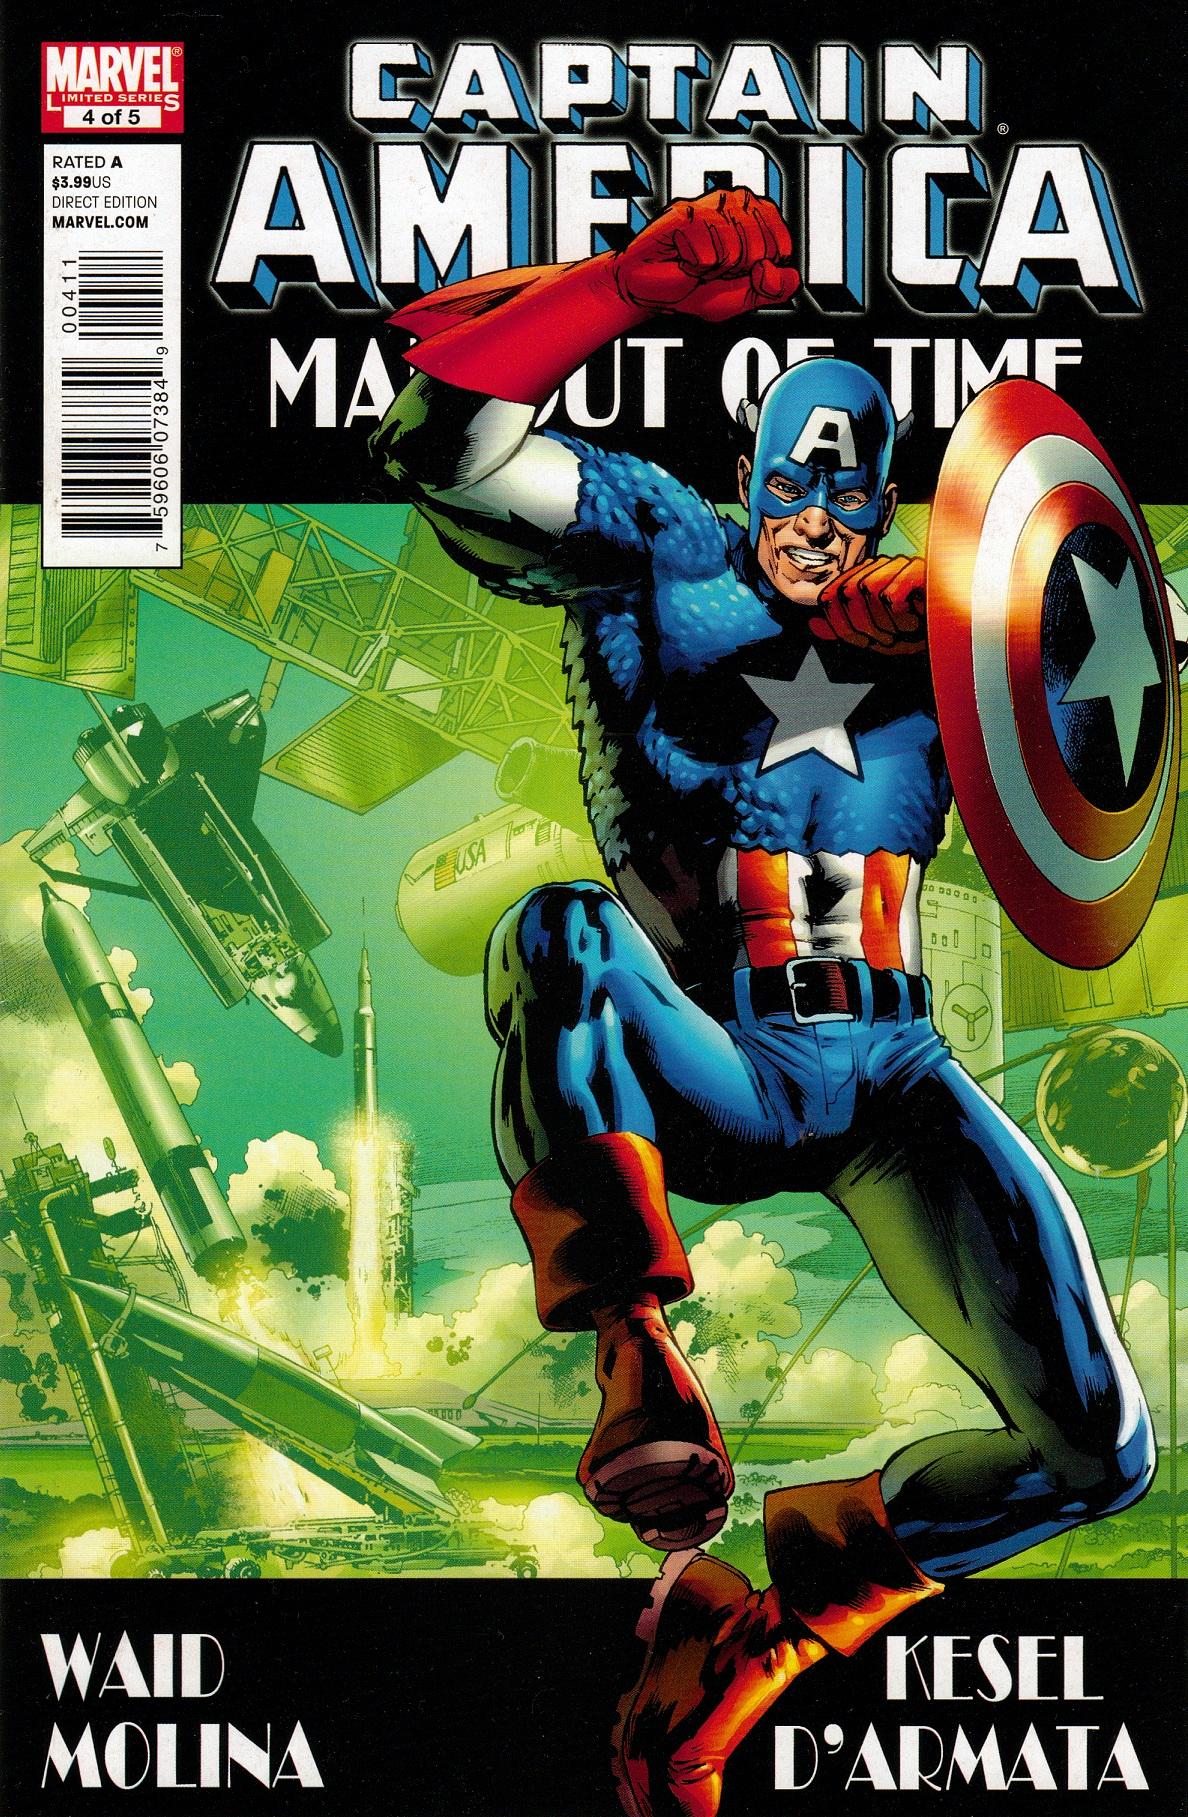 Captain America: Man Out of Time Vol. 1 #4